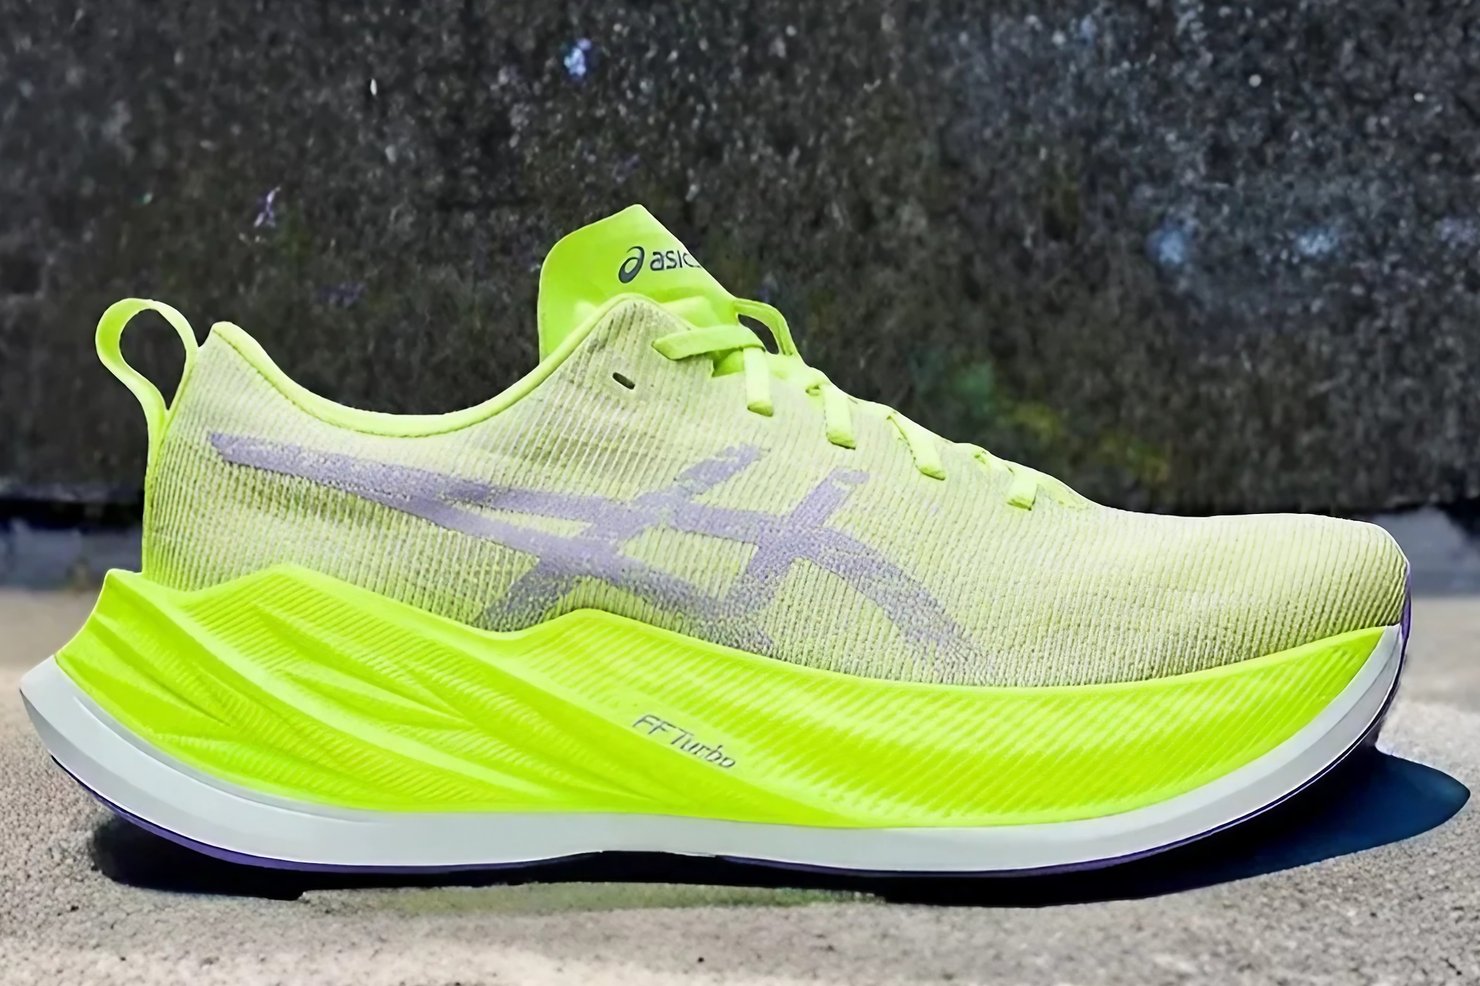 The Asics Superblast in front of a rock wall.